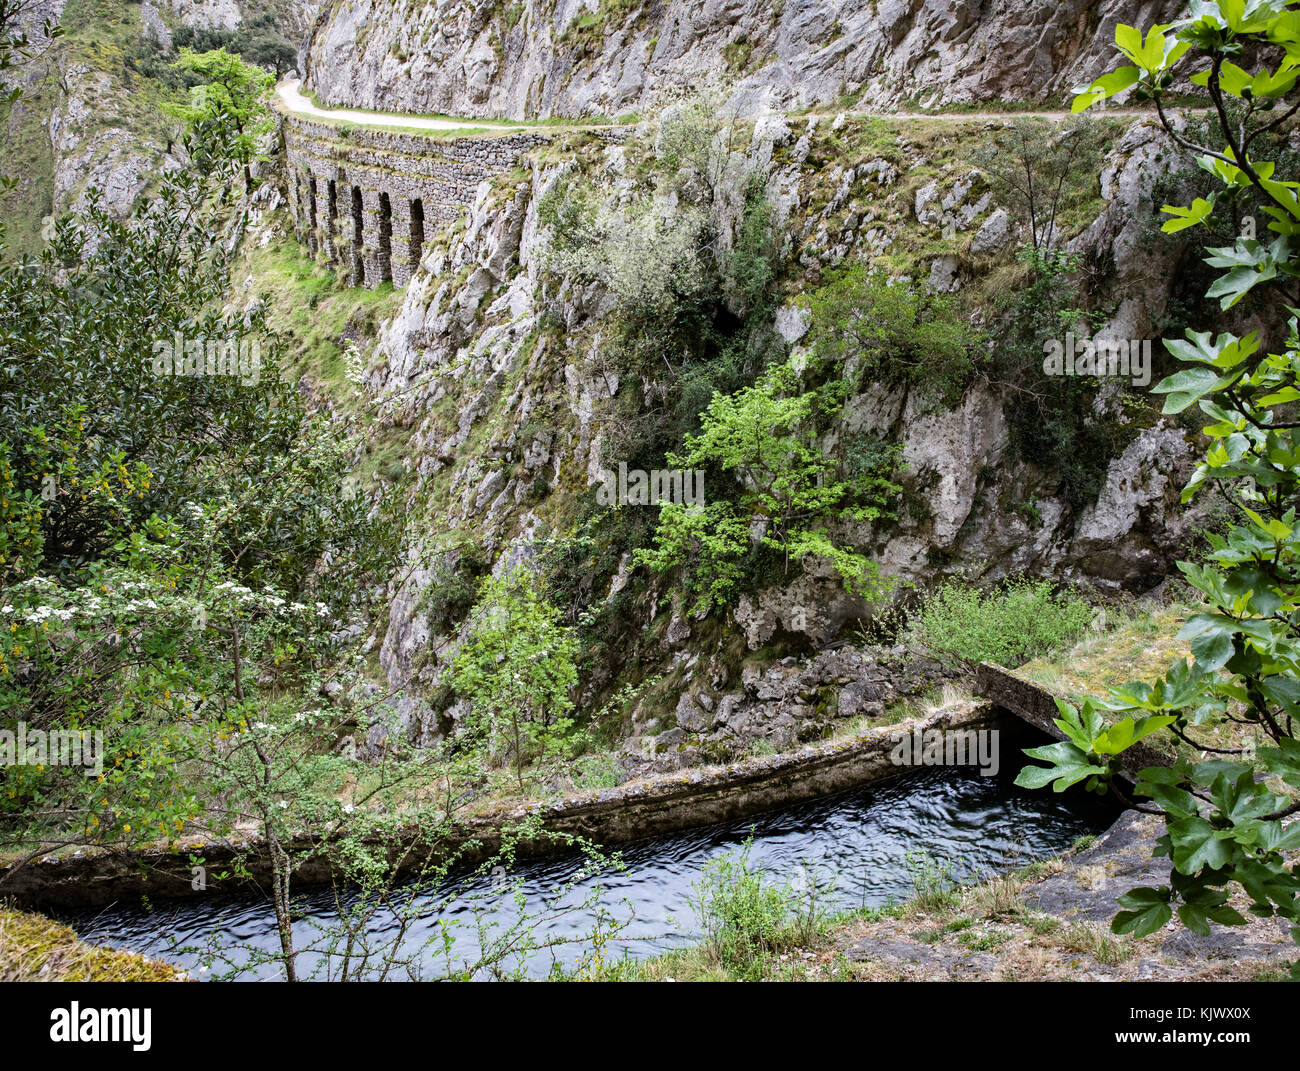 Hydroelectric feeder canal and service path winding through the deep karst limestone chasm of the Cares Gorge in northern Spain Stock Photo